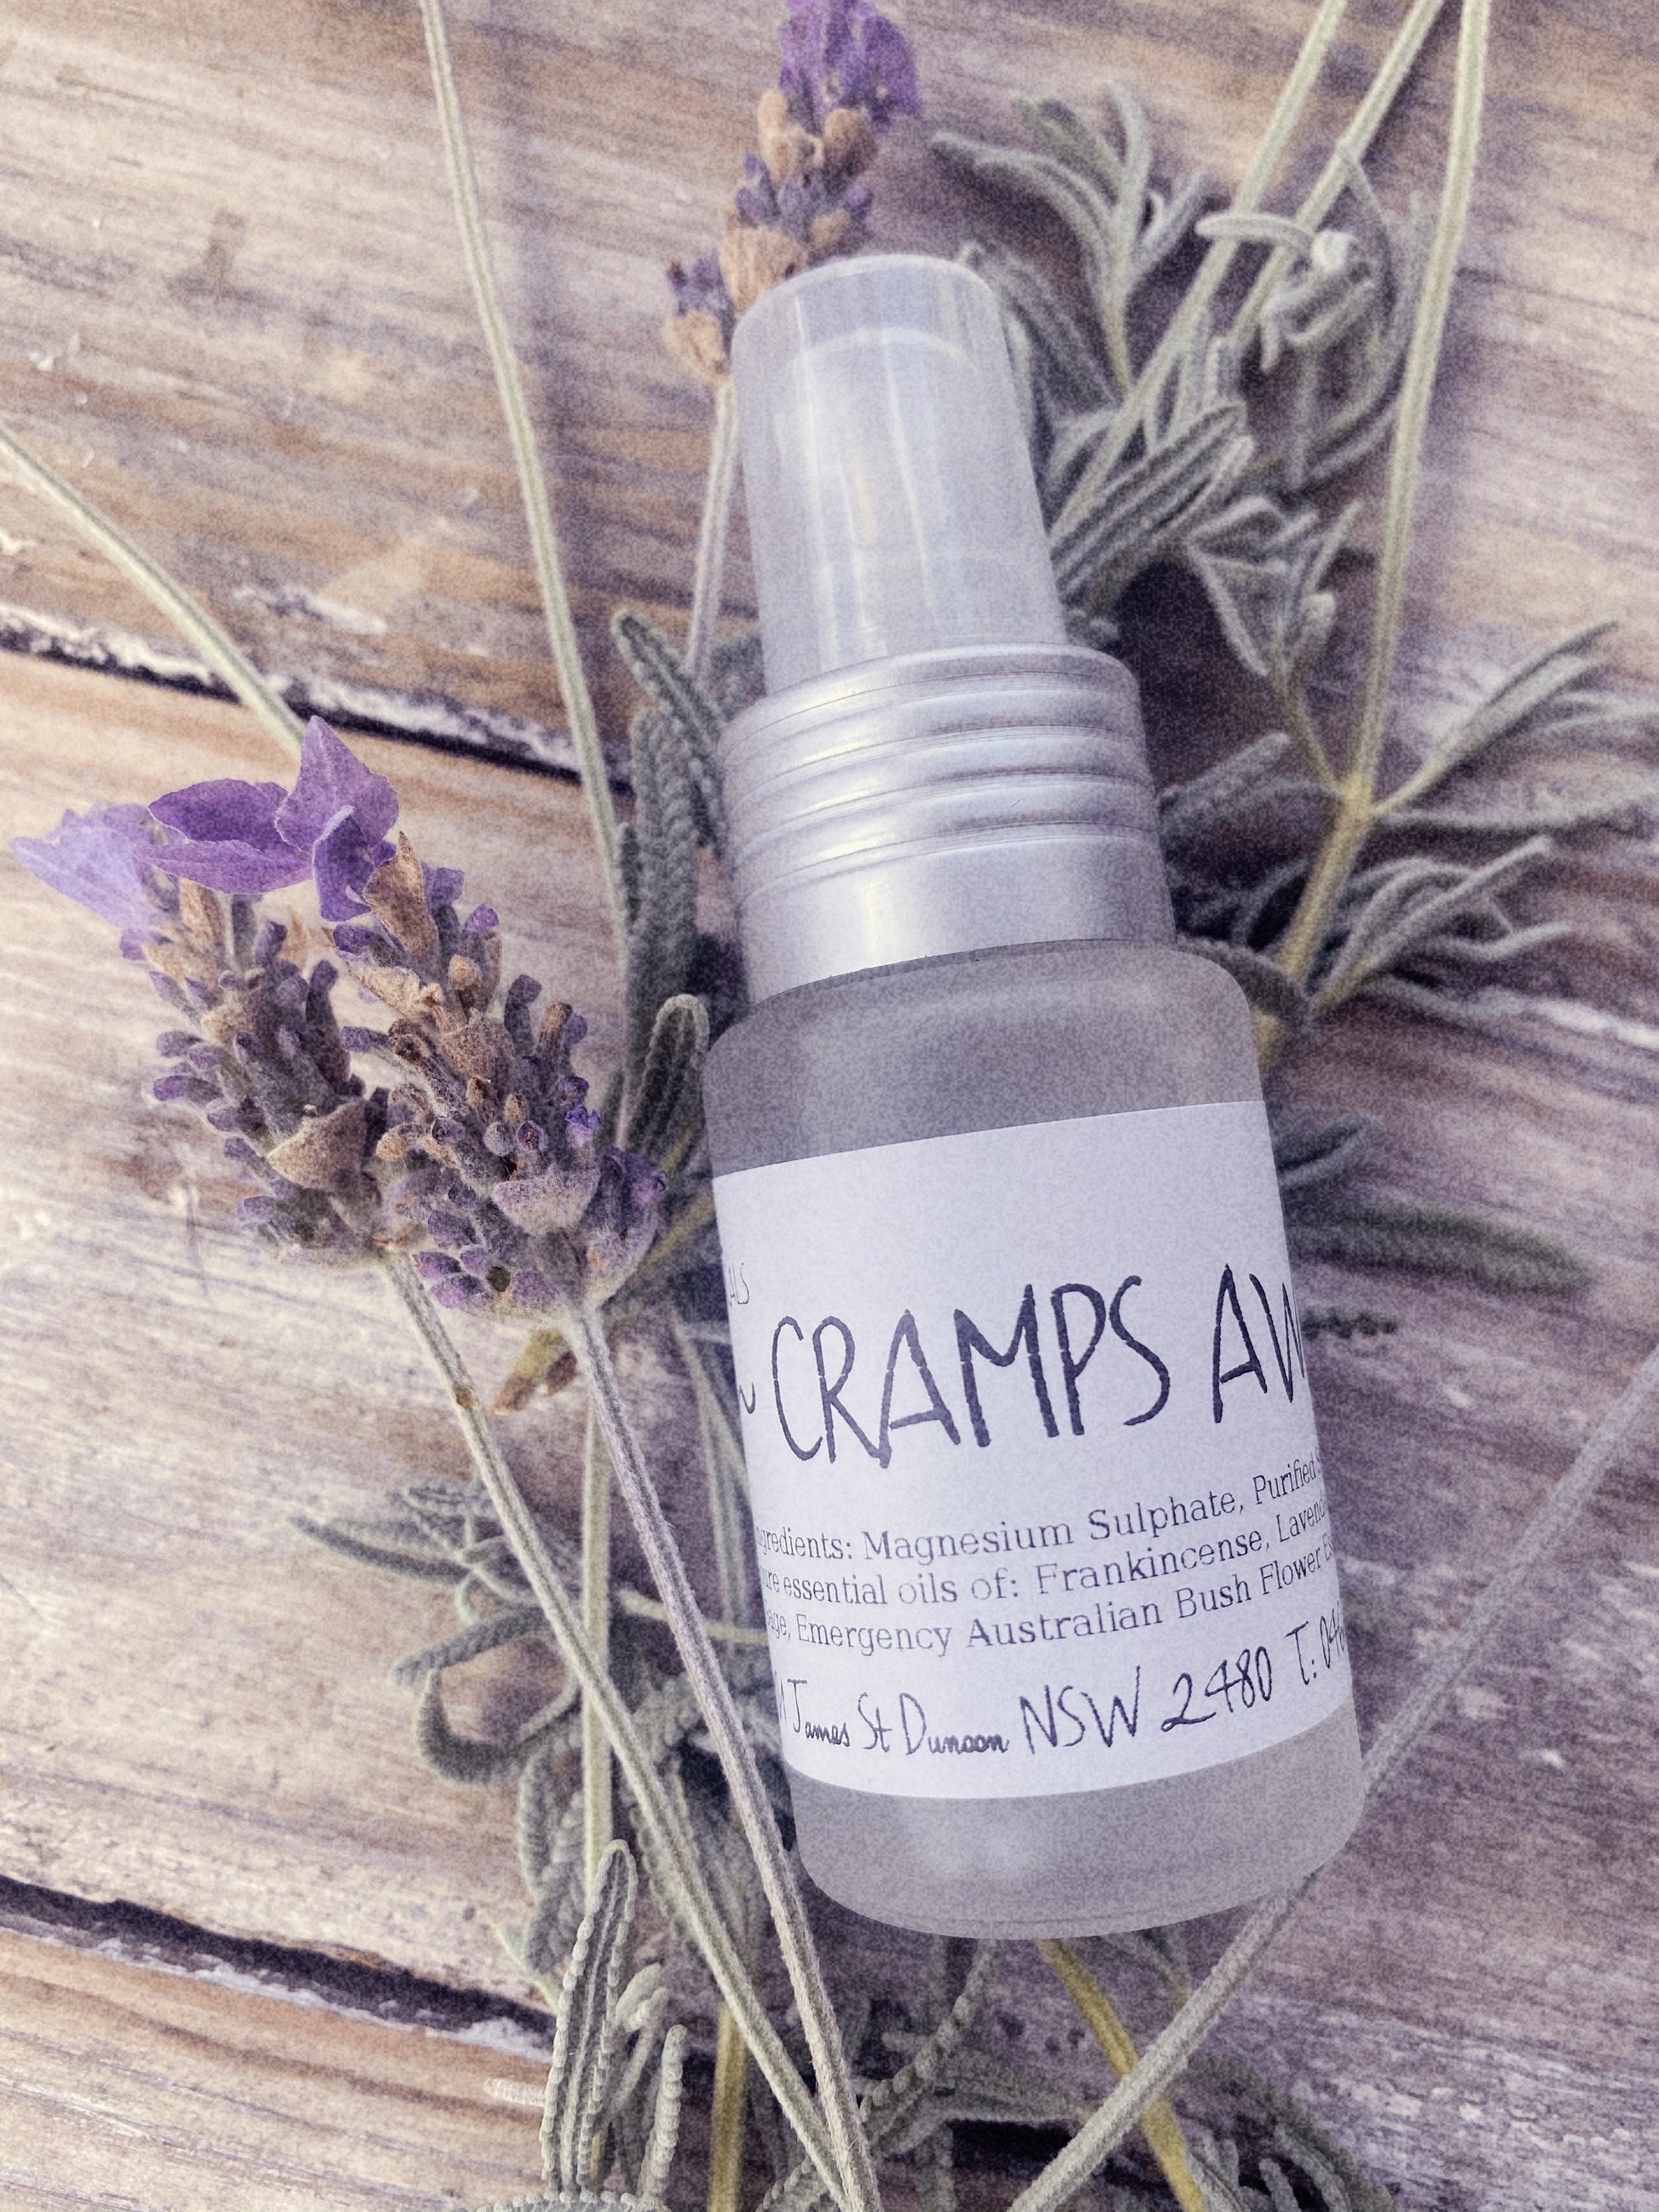 magnesium spray, cramps, muscle cramp, pain relief, restless leg syndrome, twitchy legs, magnesium sulphate, 100% pure essential oils, frankincense oil, lavender essential oil, amyris oil, clary sage essential oil, Ausflower essences, PMS, PMT, pre-menstrual tension syndrome, menstrual cramps, period cramps, apothecary, hand made with love, artisan, artisinal, qualified herbalist, aromatherapy.